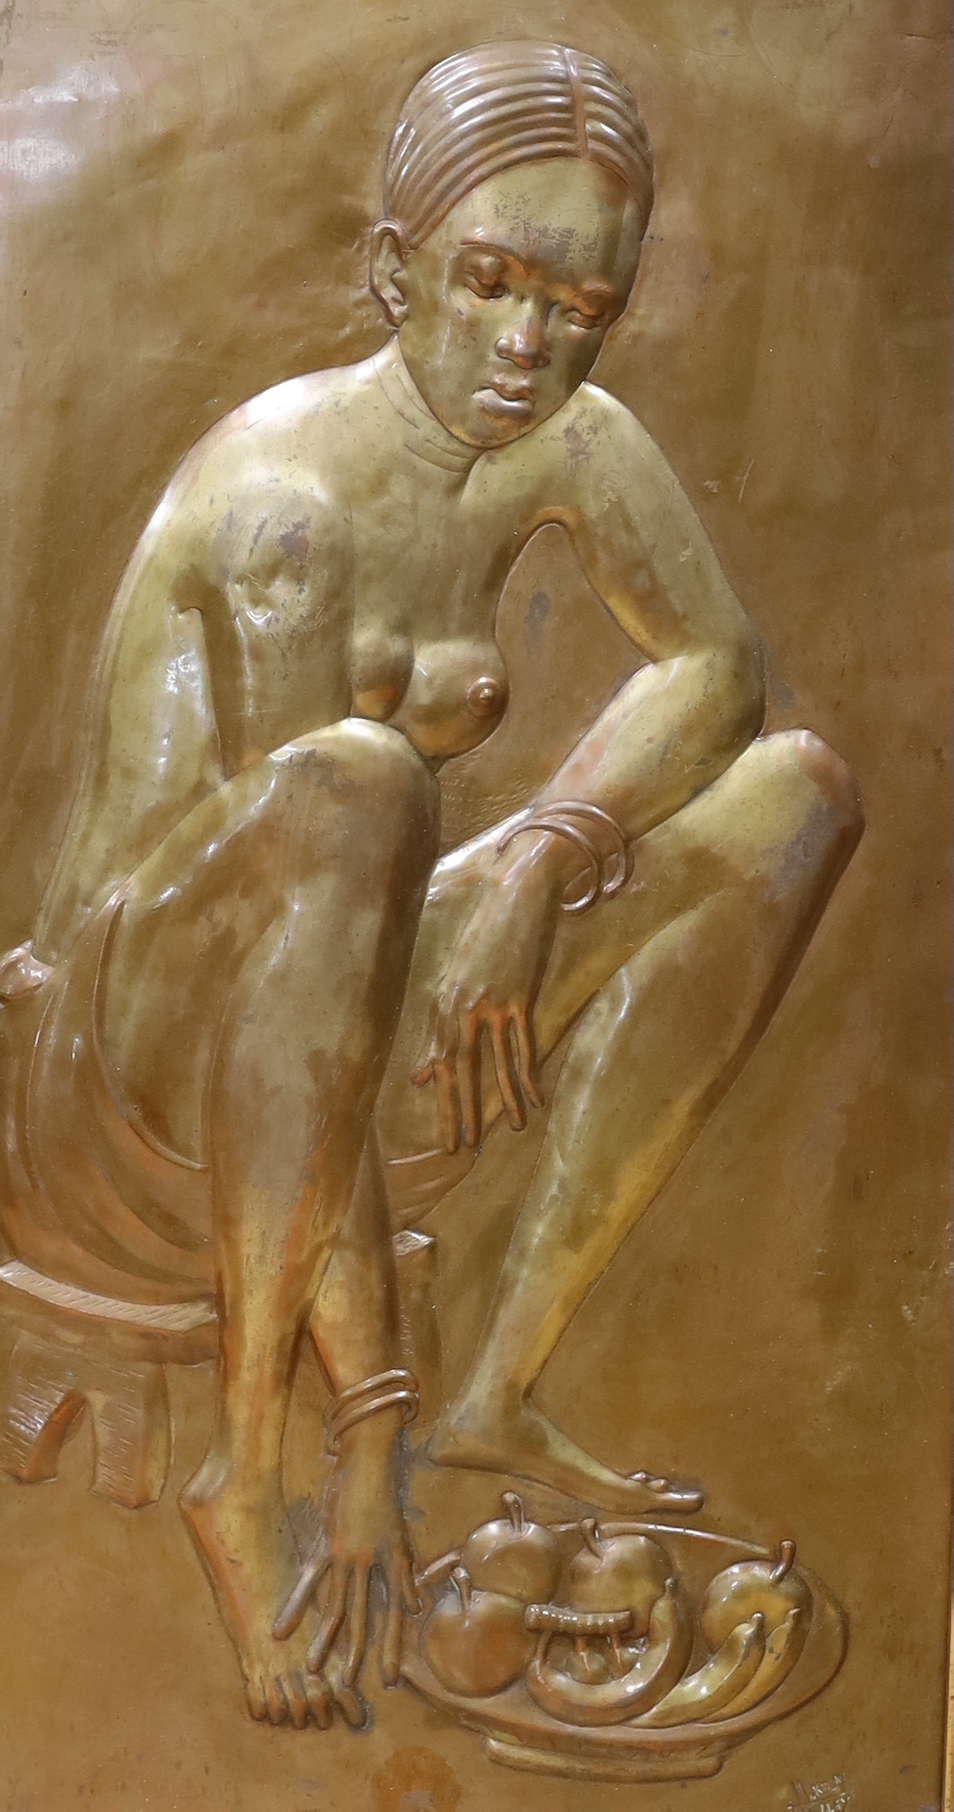 An embossed copper panel depicting a seated African lady